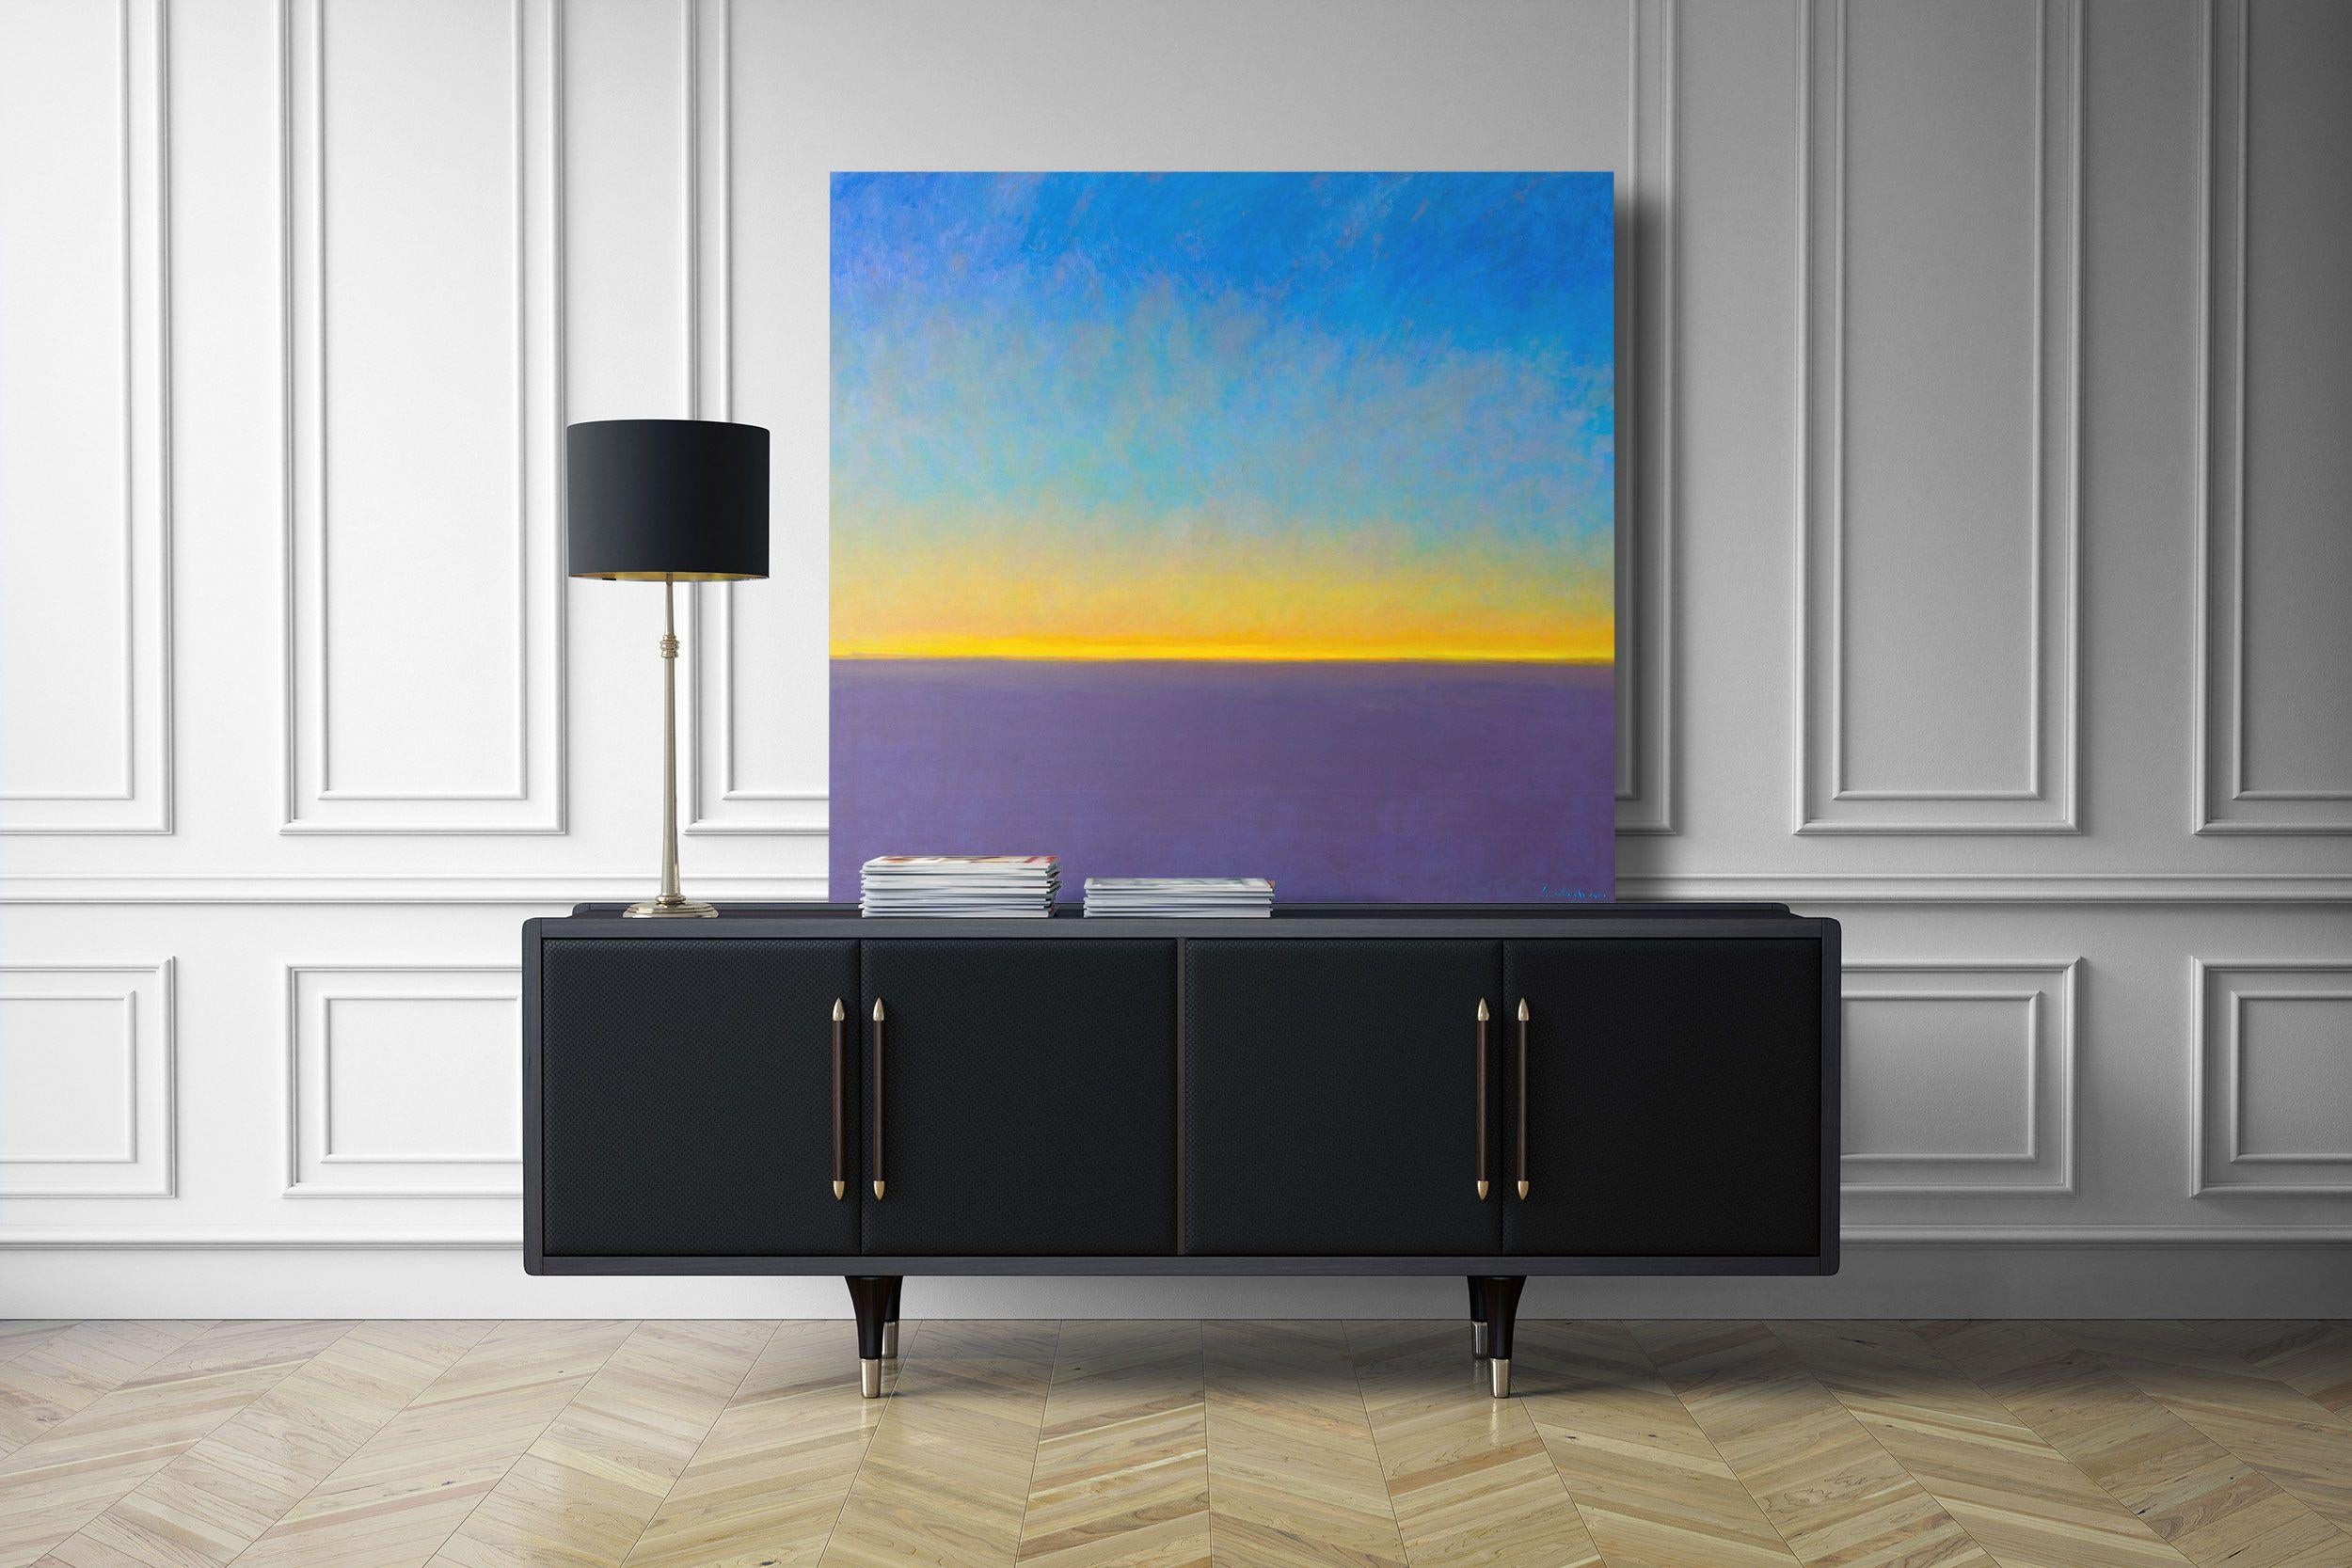 The work is an original painting, it is a hand made oil on canvas.  This series of paintings is the result of over 13 years of live study of landscapes. Painting in the air, mounting the easel and the canvas directly on the chosen place, I tried to